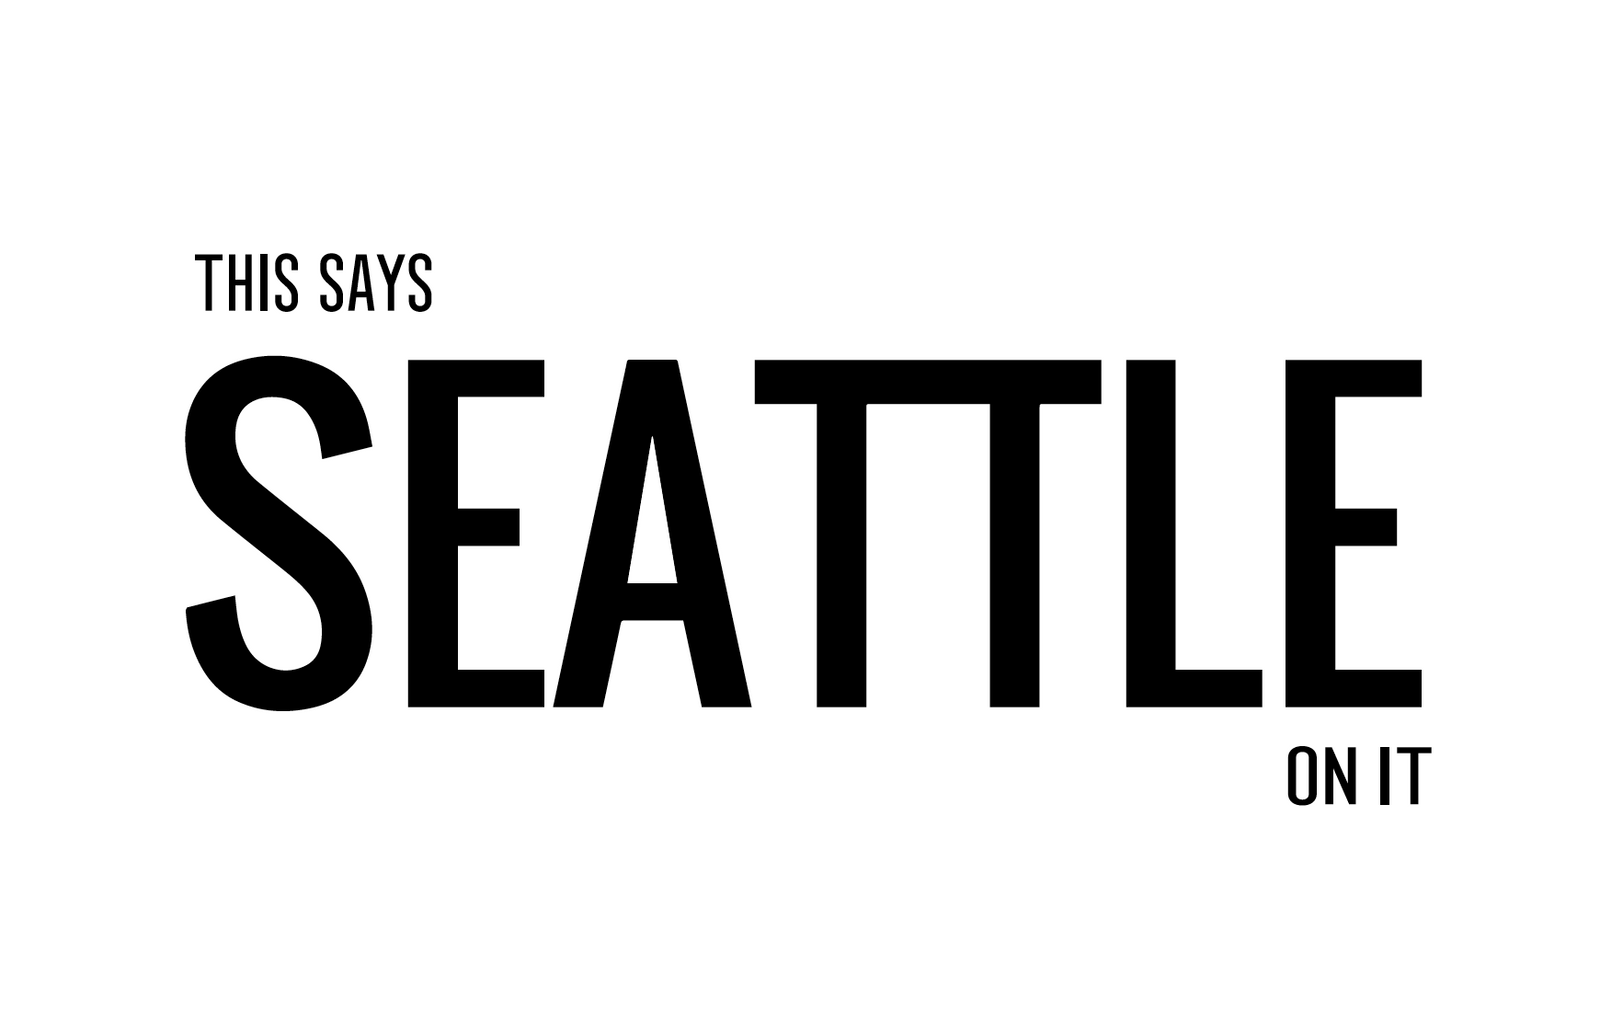 Postcard: The Says SEATTLE On It - Ten Pack